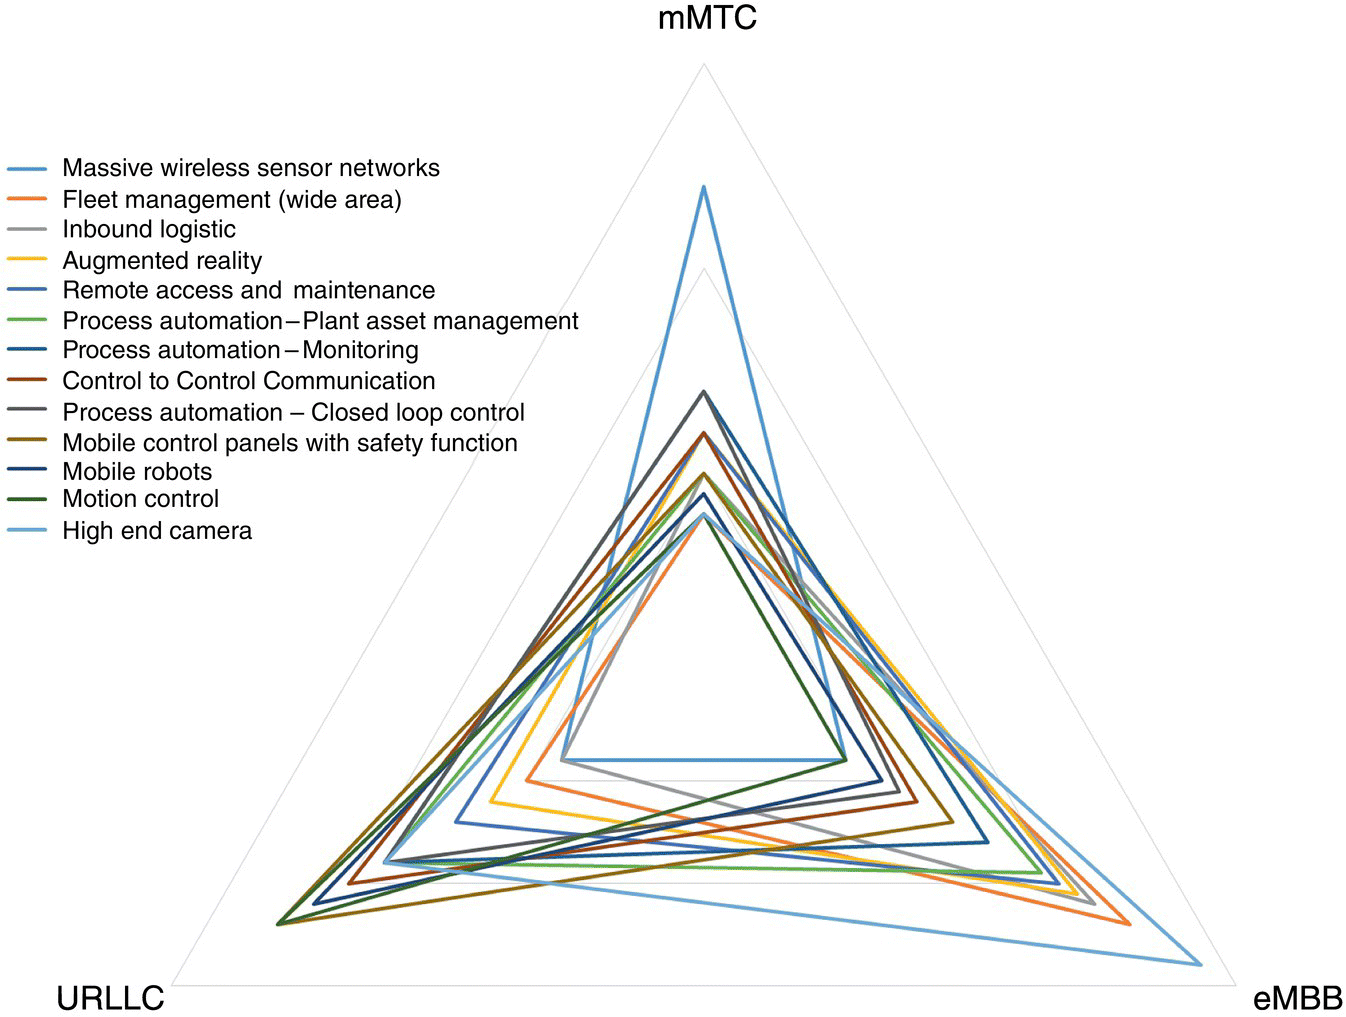 Diagram displaying a triangle with vertices labeled mMTC, URLLC, and eMBB, containing 13 overlapping triangles for high end camera, motion control, mobile robots, massive wireless sensor networks, etc.